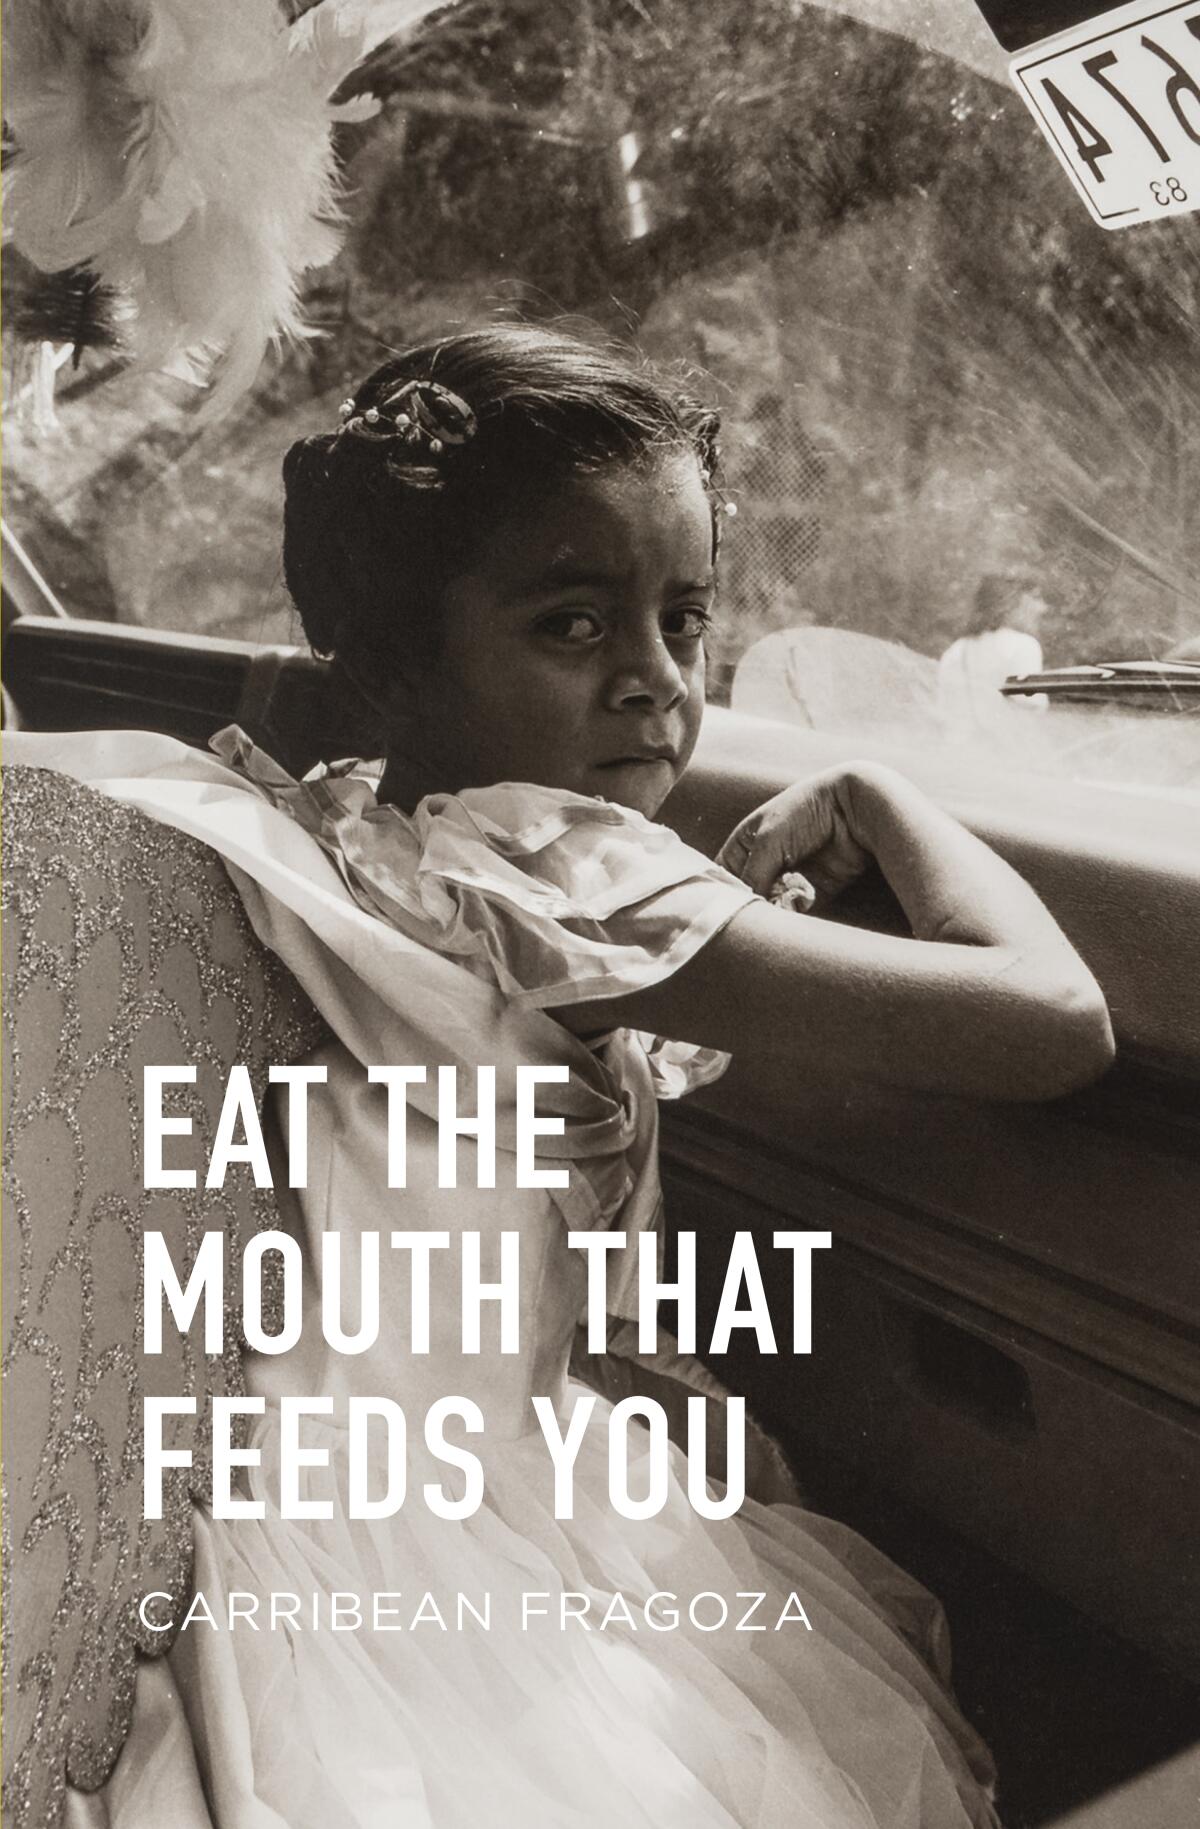 The cover for Carribean Fragoza's 2021 collection of short stories, "Eat the Mouth That Feeds You," published by City Lights.